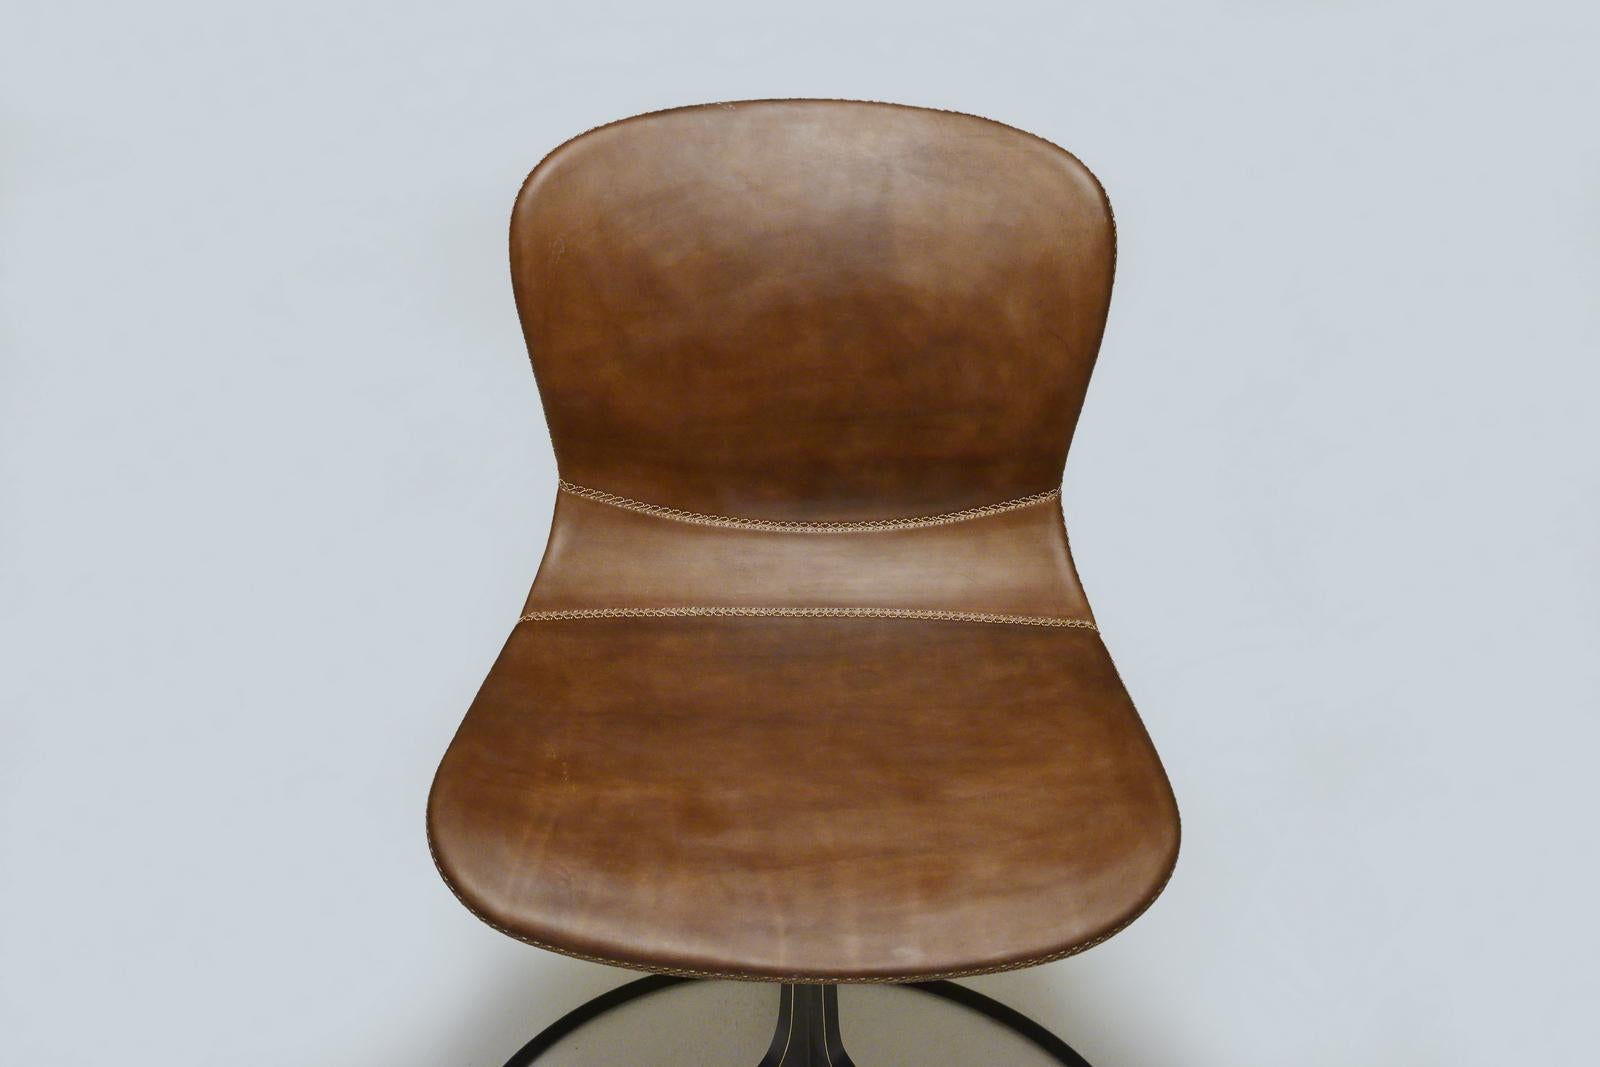 Bespoke Brass Swivel Chair with Floor-Ring, in Truffe Leather, by P. Tendercool For Sale 1